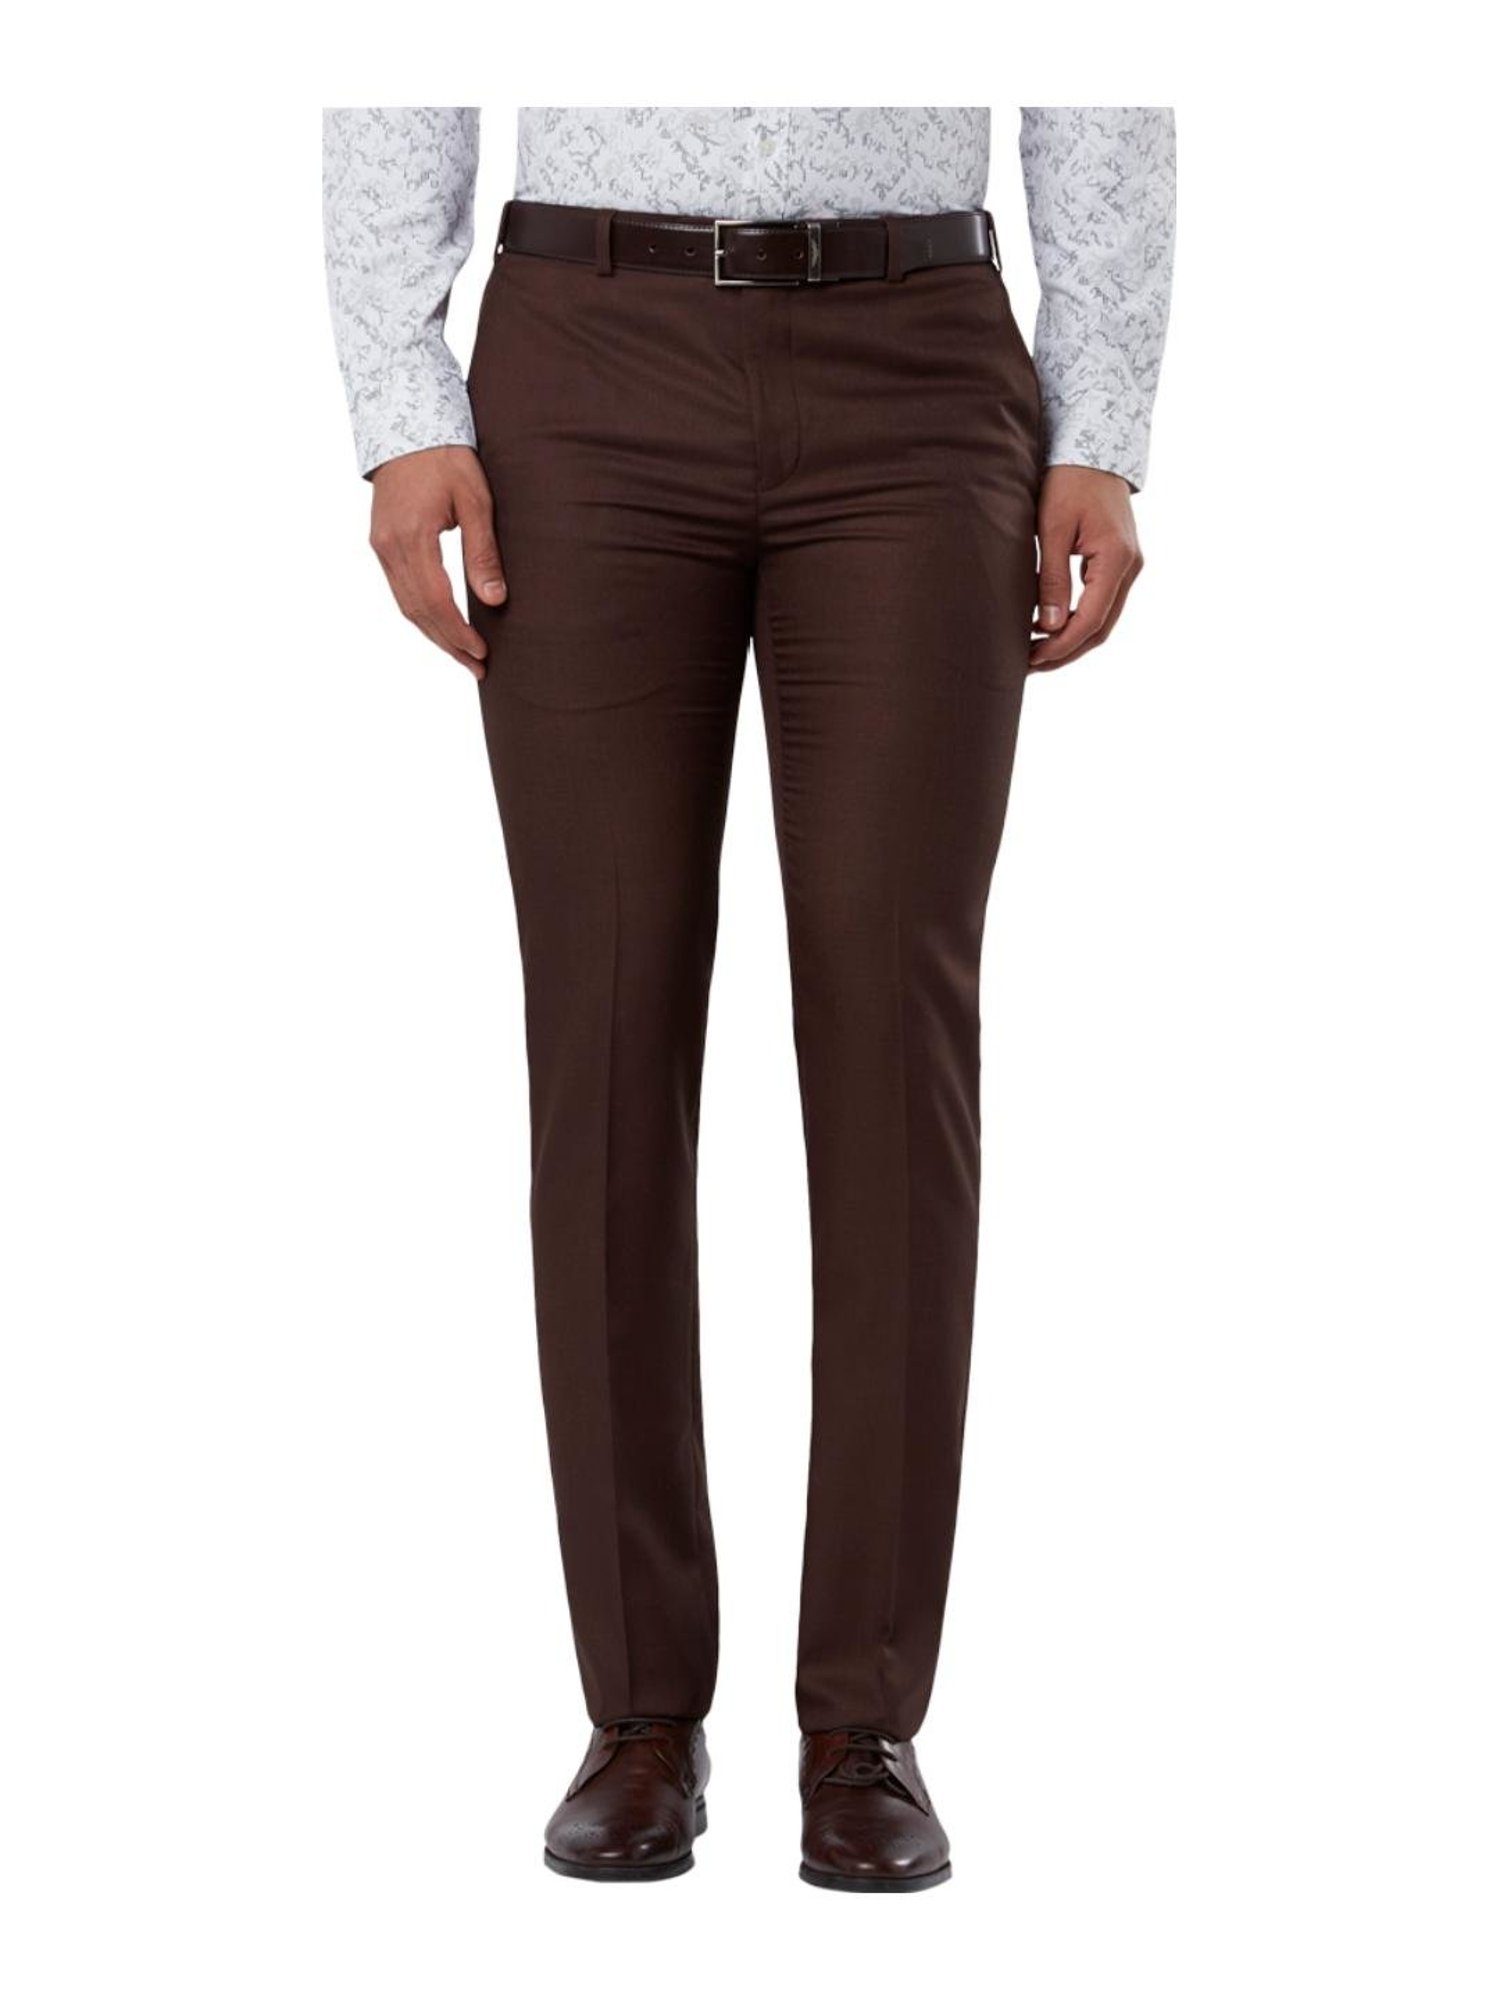 Parx Mens Trousers - Buy Parx Mens Trousers Online at Best Prices In India  | Flipkart.com